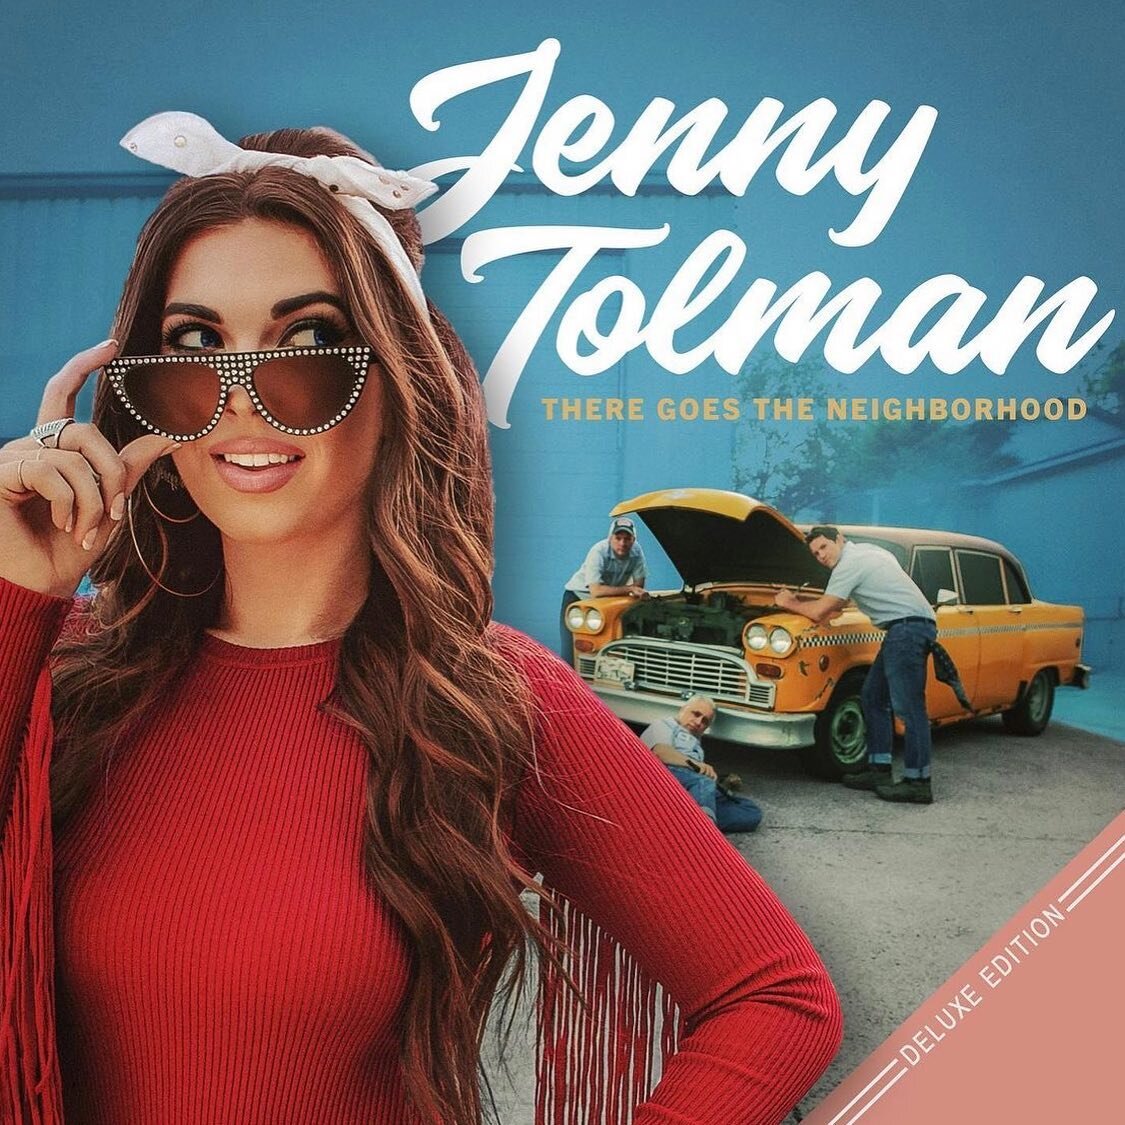 No, that ain&rsquo;t good&hellip;There goes the neighborhood&hellip; 💃🏻 @jennytolman 

We are OBSESSED w/ Jenny Tolmans&rsquo; Music 🎶 Which Jenny song is your favorite?!